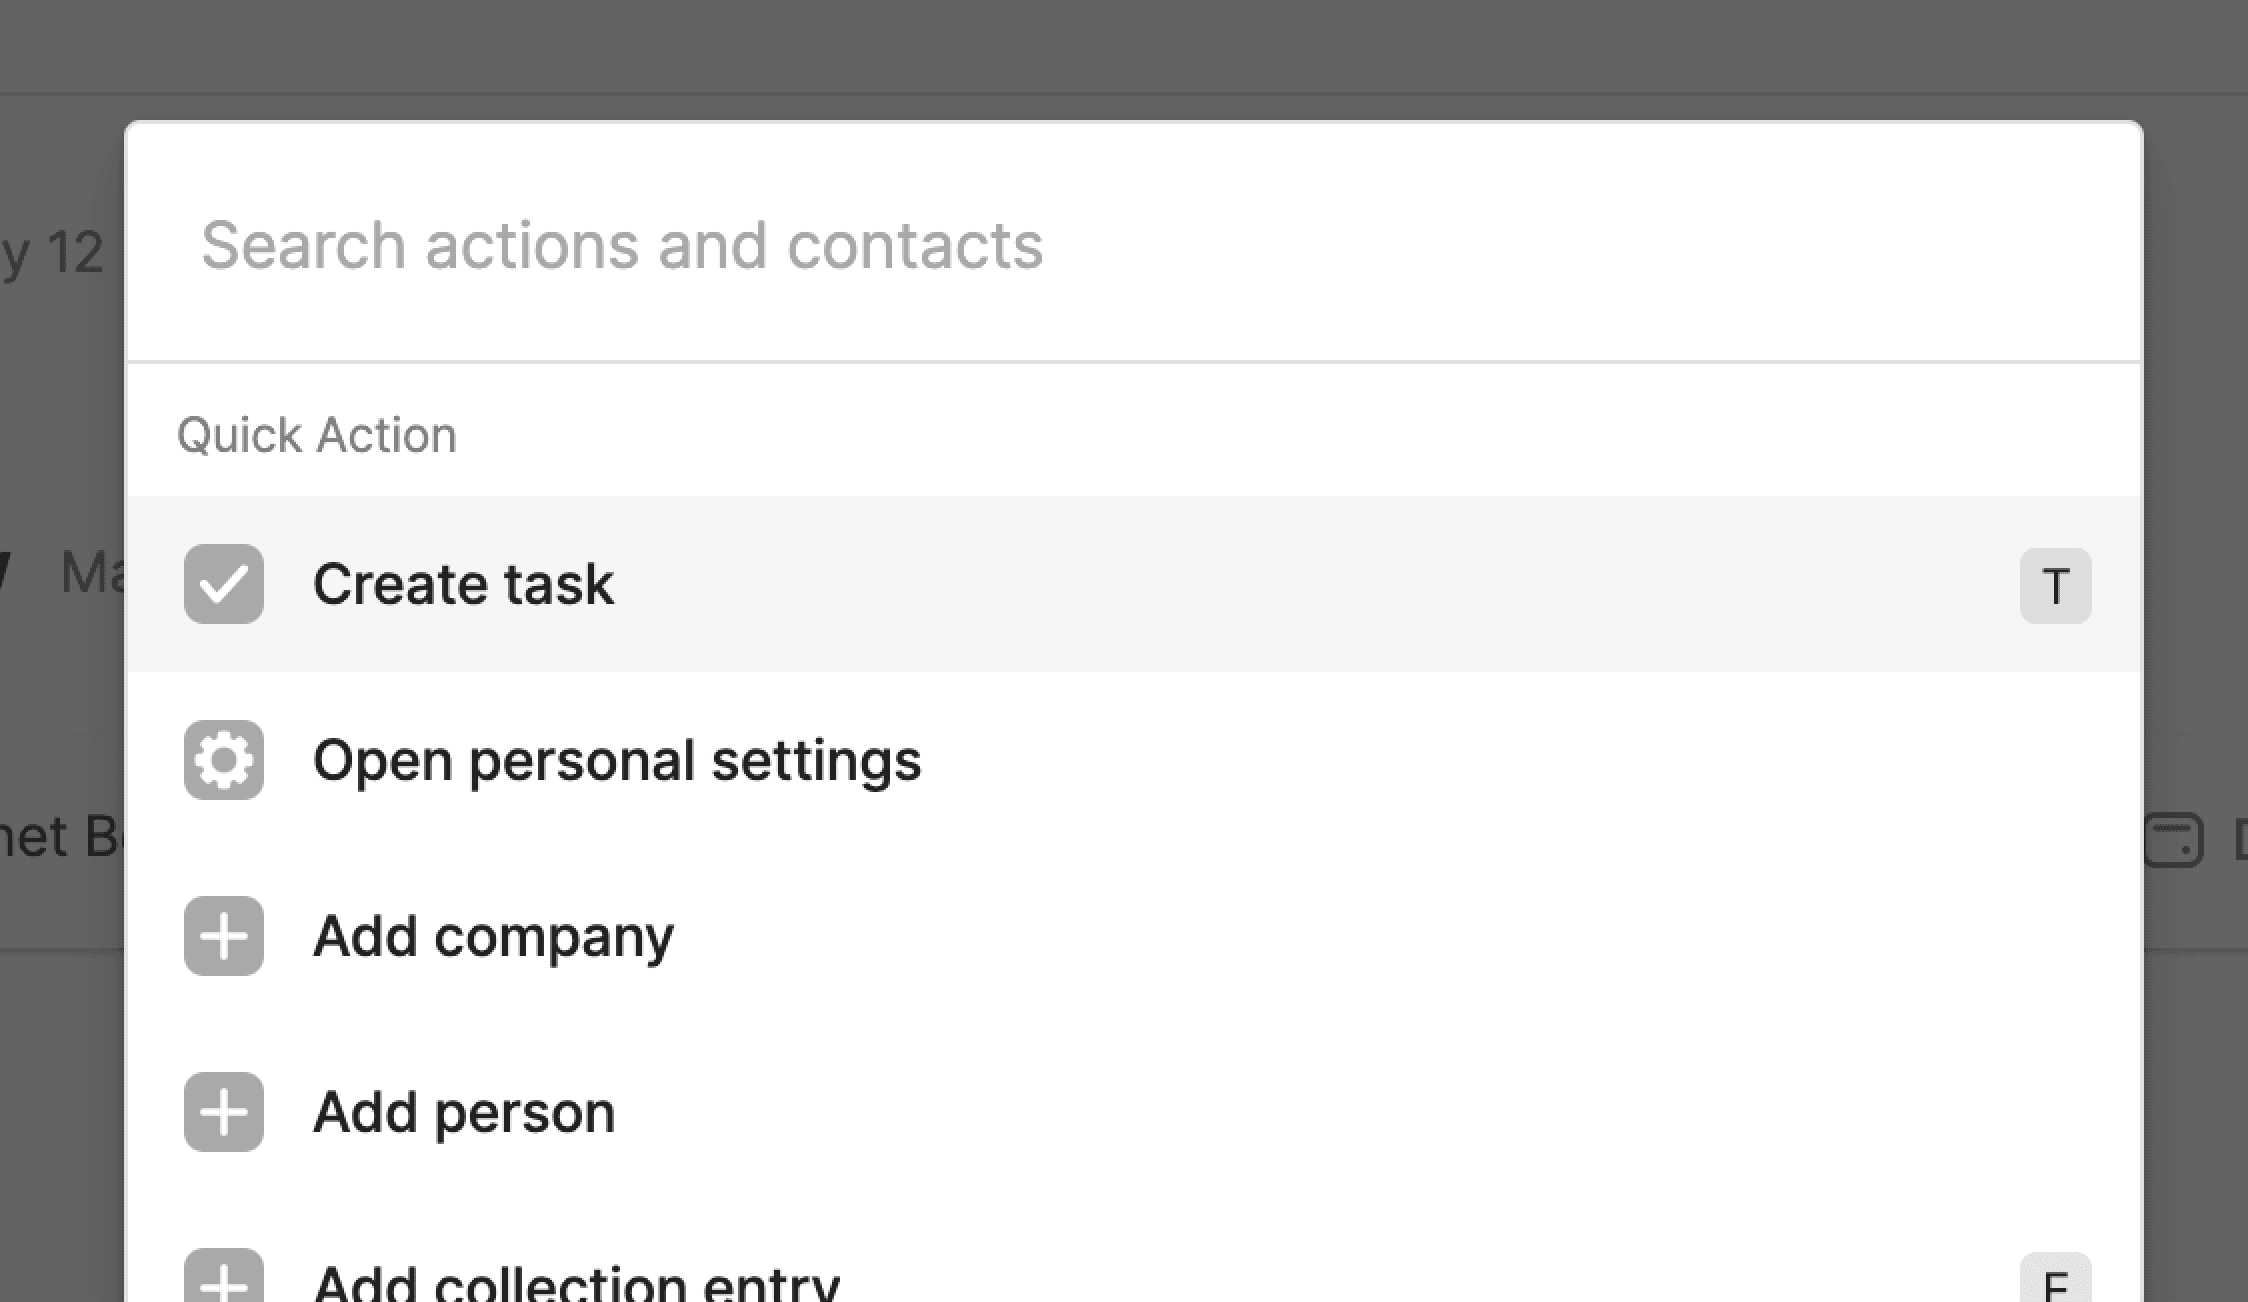 Attio's quick actions dialogue box is shown, accessed with the keyboard shortcut cmd + k. The options for quick actions change depending where you are in Attio, but for this example you can see create task, open personal settings, add company, add person, and add collection entry.